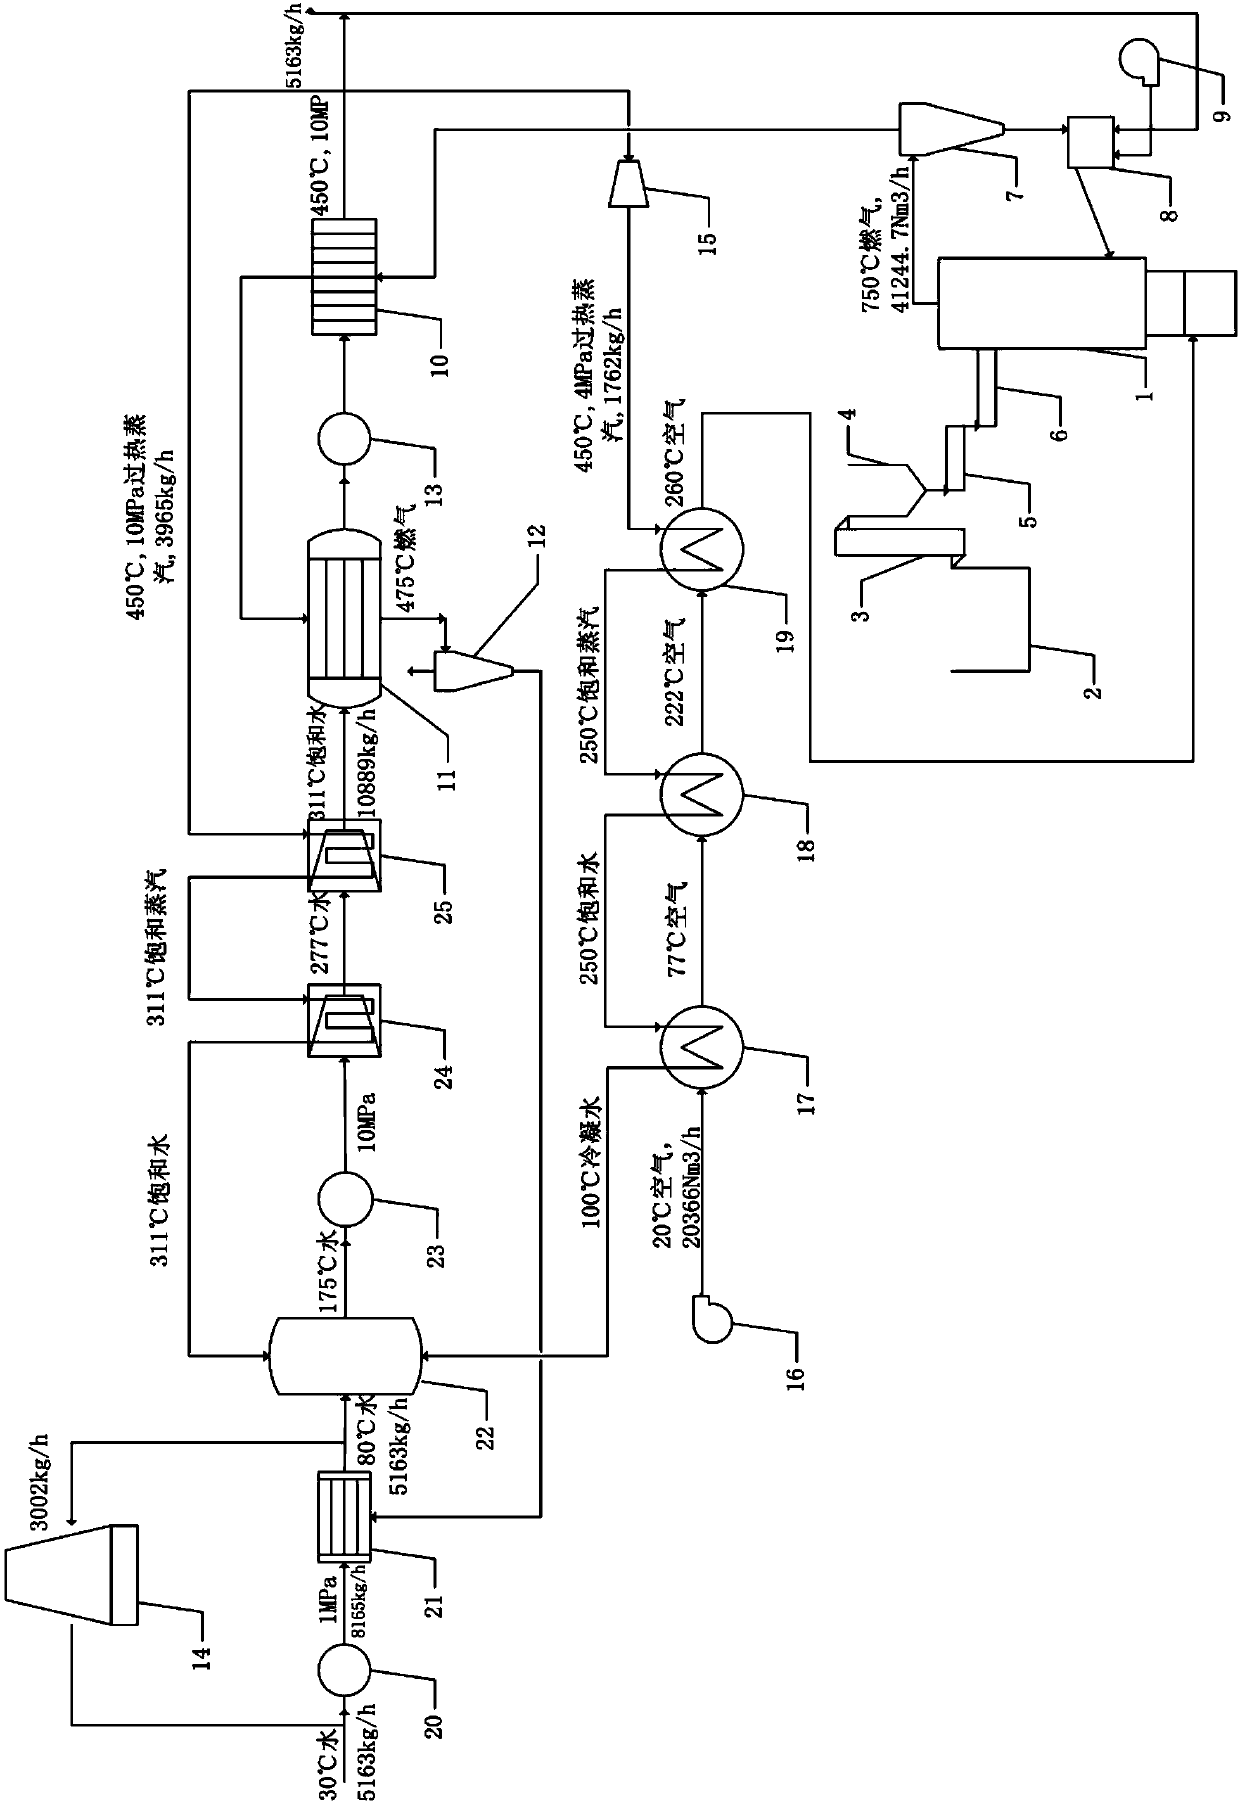 Biomass circulating-fluidized-bed gasification device